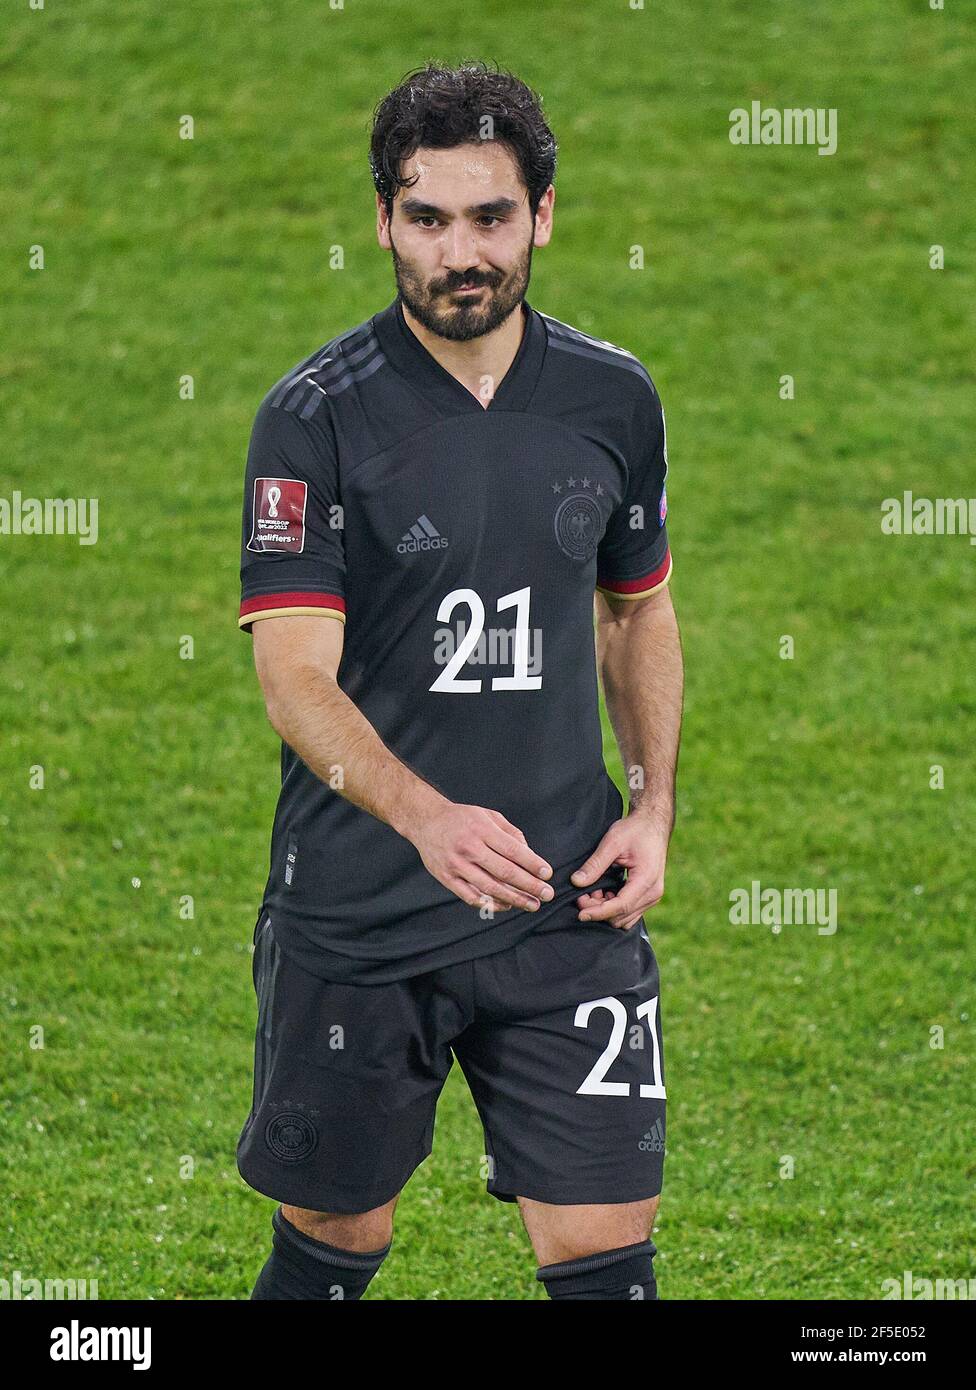 Ilkay GUENDOGAN, DFB 21,  half-size, portrait, one person, single, Aktion, Einzelbild, angeschnittenes Einzelmotiv, Halbfigur, halbe Figur,  in the match GERMANY - ICELAND 3-0 Deutschland - ISLAND 3-0 Qualification for World Championships, WM Quali, Season 2020/2021,  March 25, 2021  in Duisburg, Germany.  © Peter Schatz / Alamy Live News  Important: DFB regulations prohibit any use of photographs as image sequences and/or quasi-video. Stock Photo